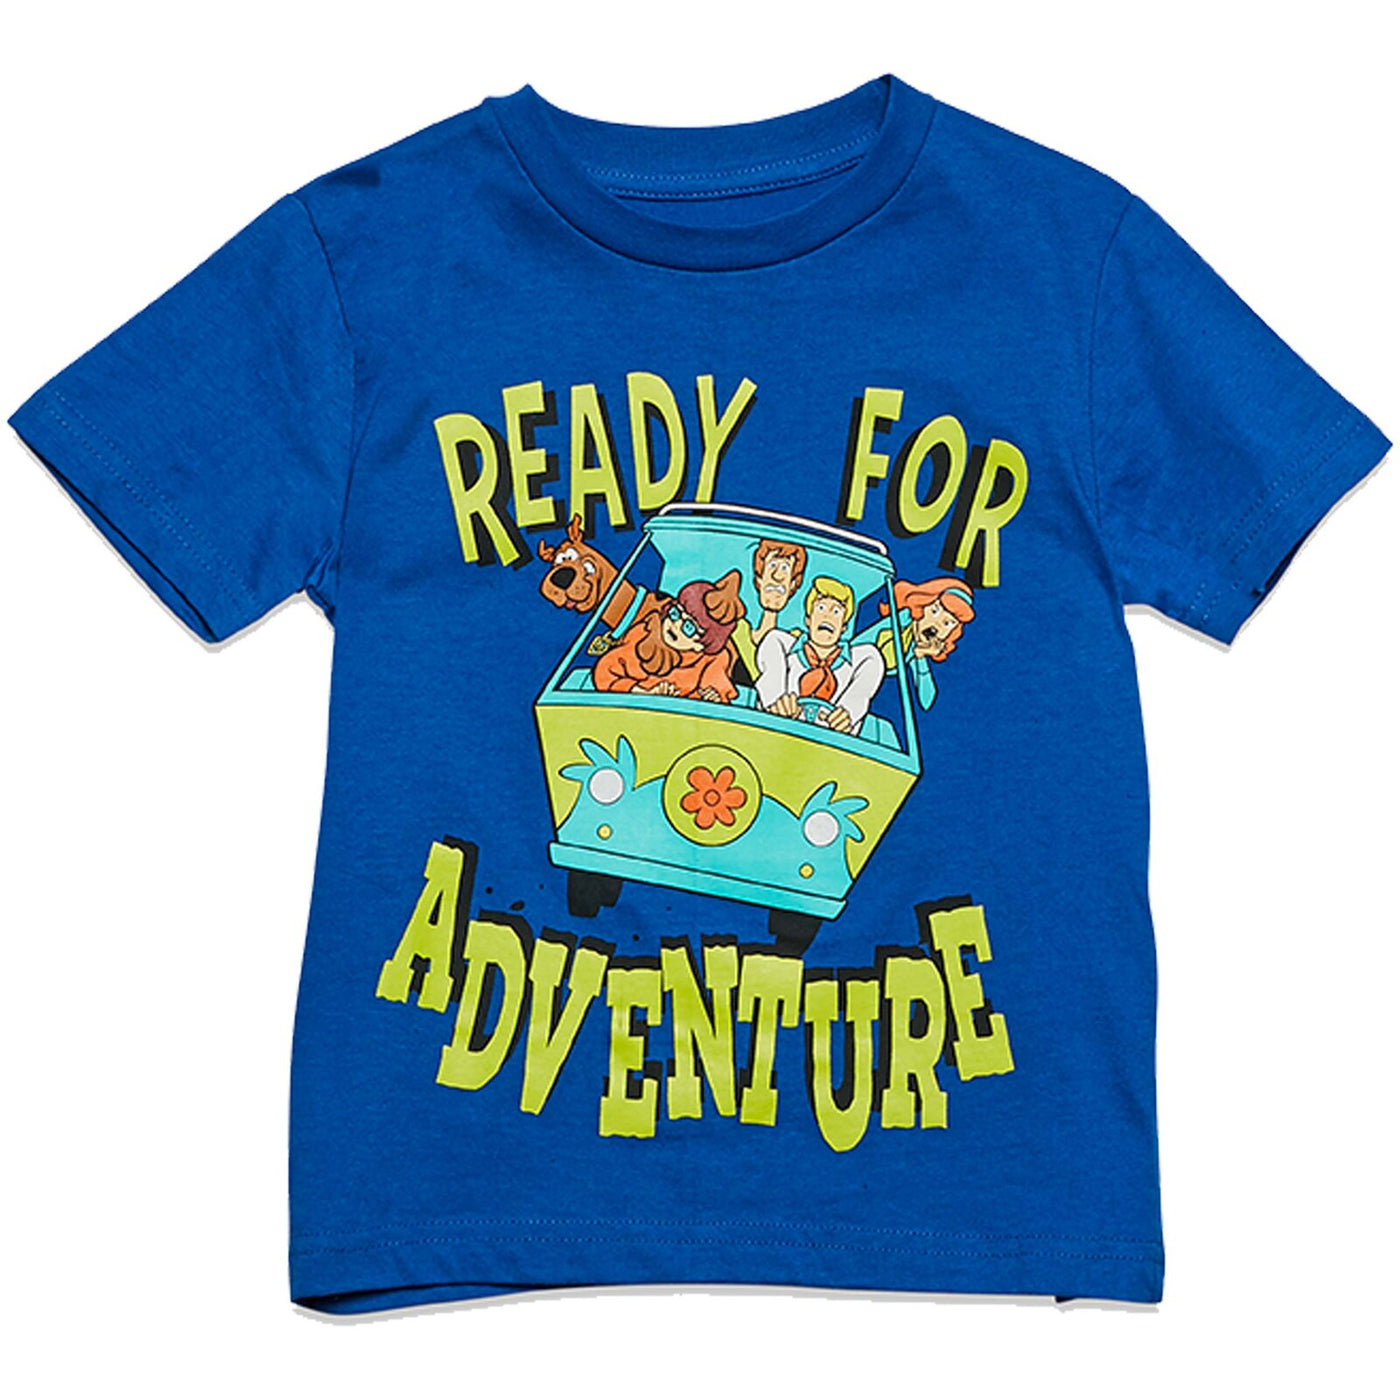 Scooby-Doo Scooby Doo 3 Pack T-Shirts